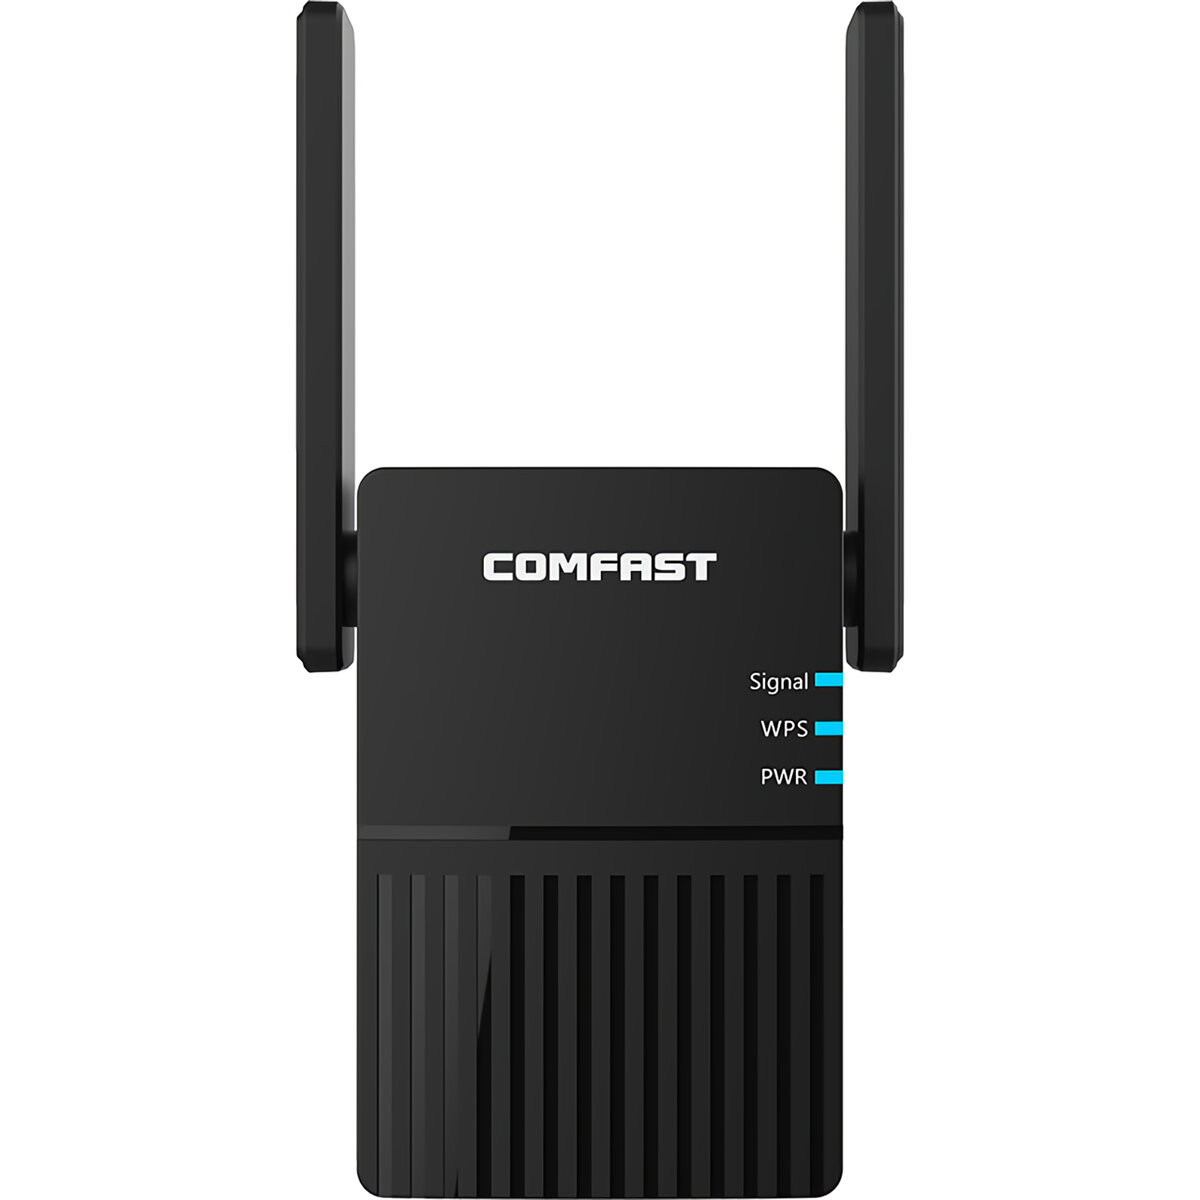 COMFAST AC1200 5G WiFi Draadloze Repeater 1200Mbps WIFI Signaal Booster Gigabit Router Signaalverste